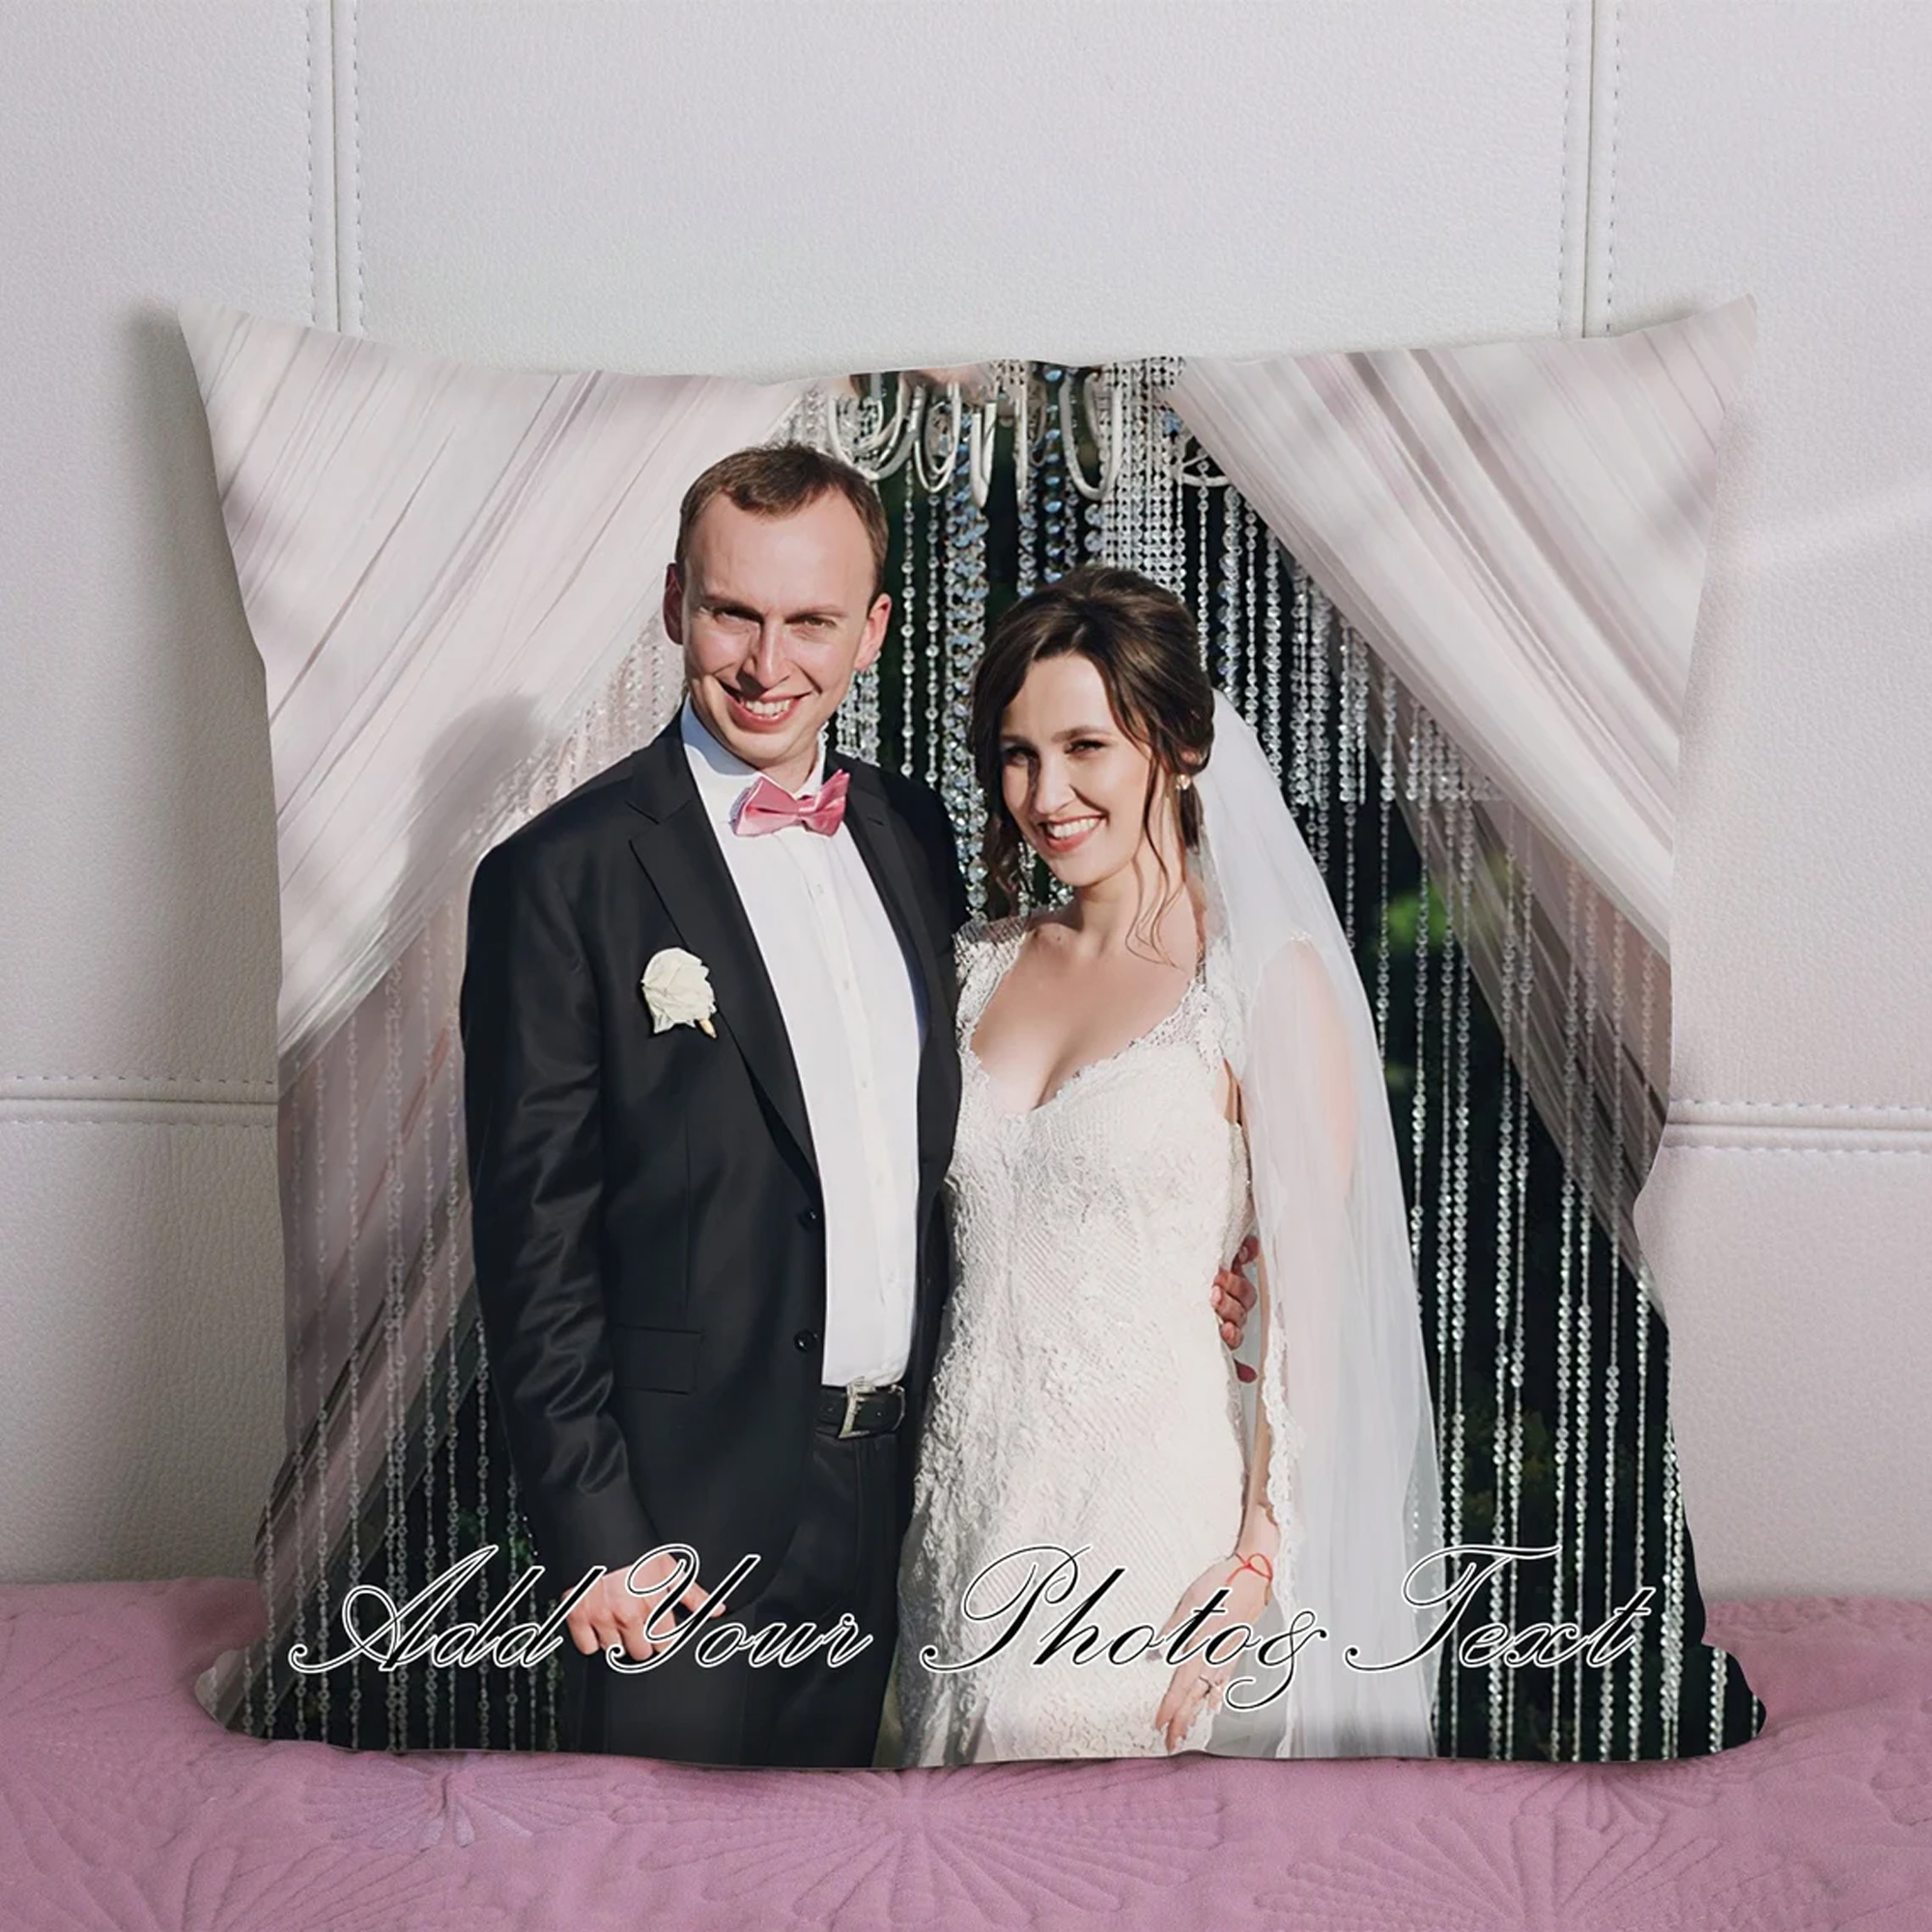 Custom Photo Pillowcase Add Picture Personalized Pillow Canvas Home Decor Housewarming Christmas Gift